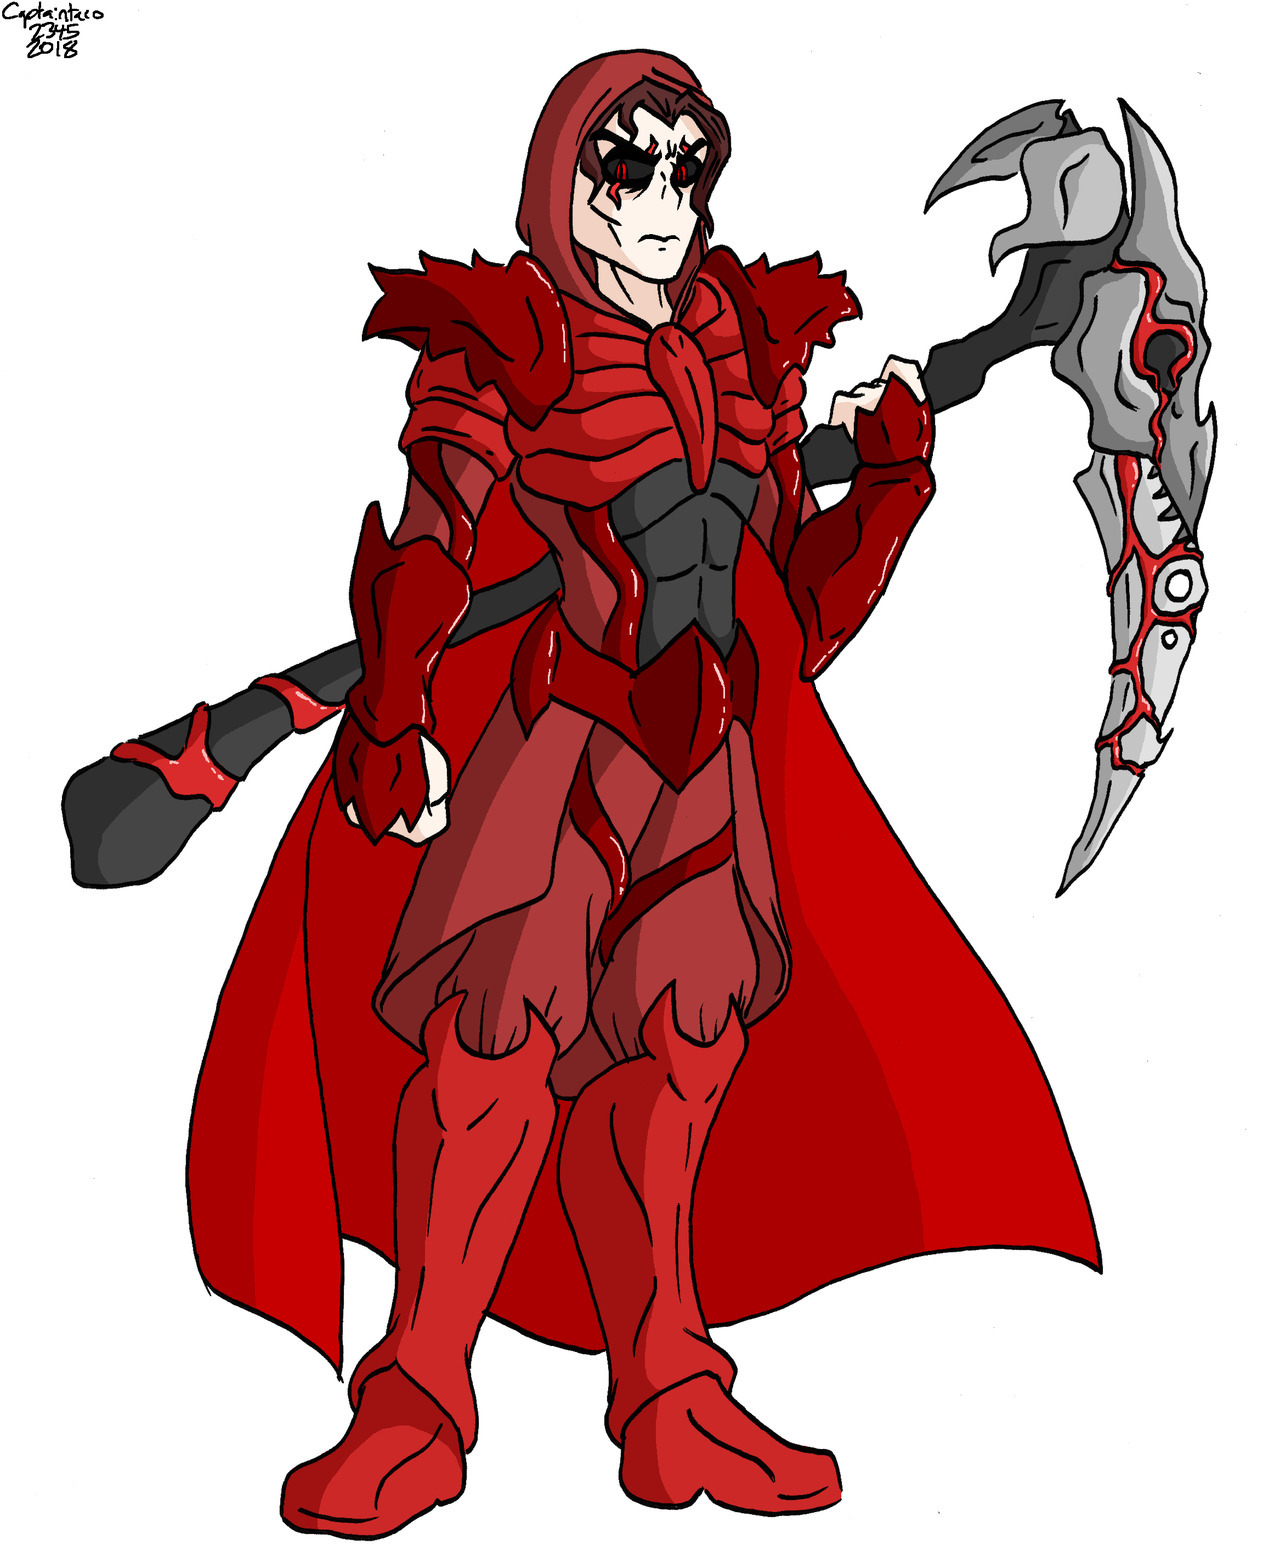 The villain from my newest Godzilla Warriors book on Wattpad; Red, the Demon Lord